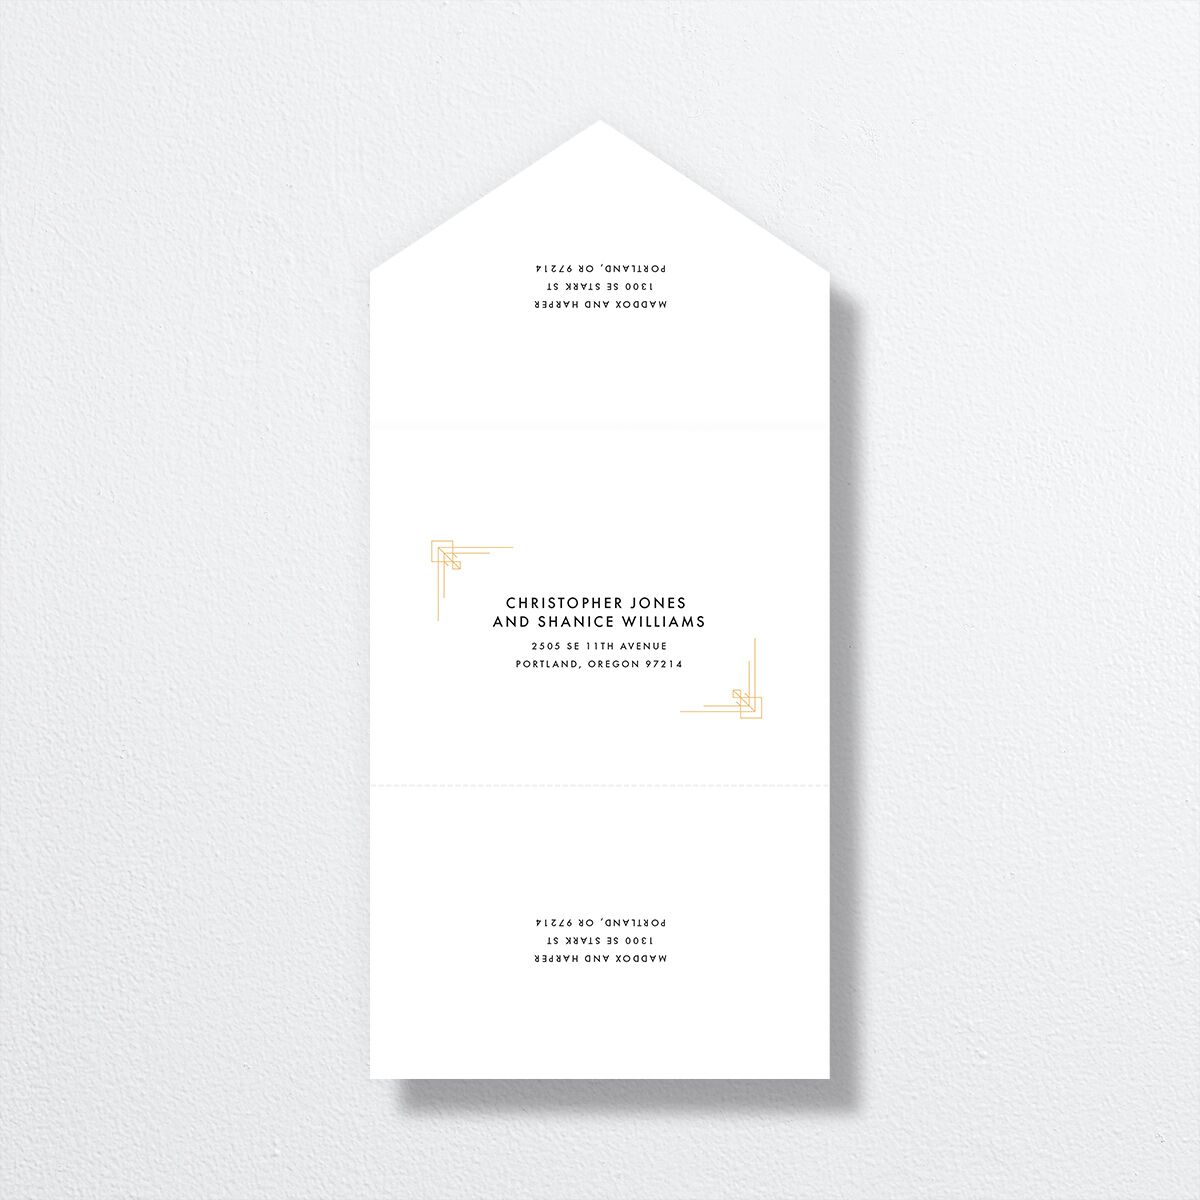 Vintage Hollywood All-in-One Wedding Invitations back